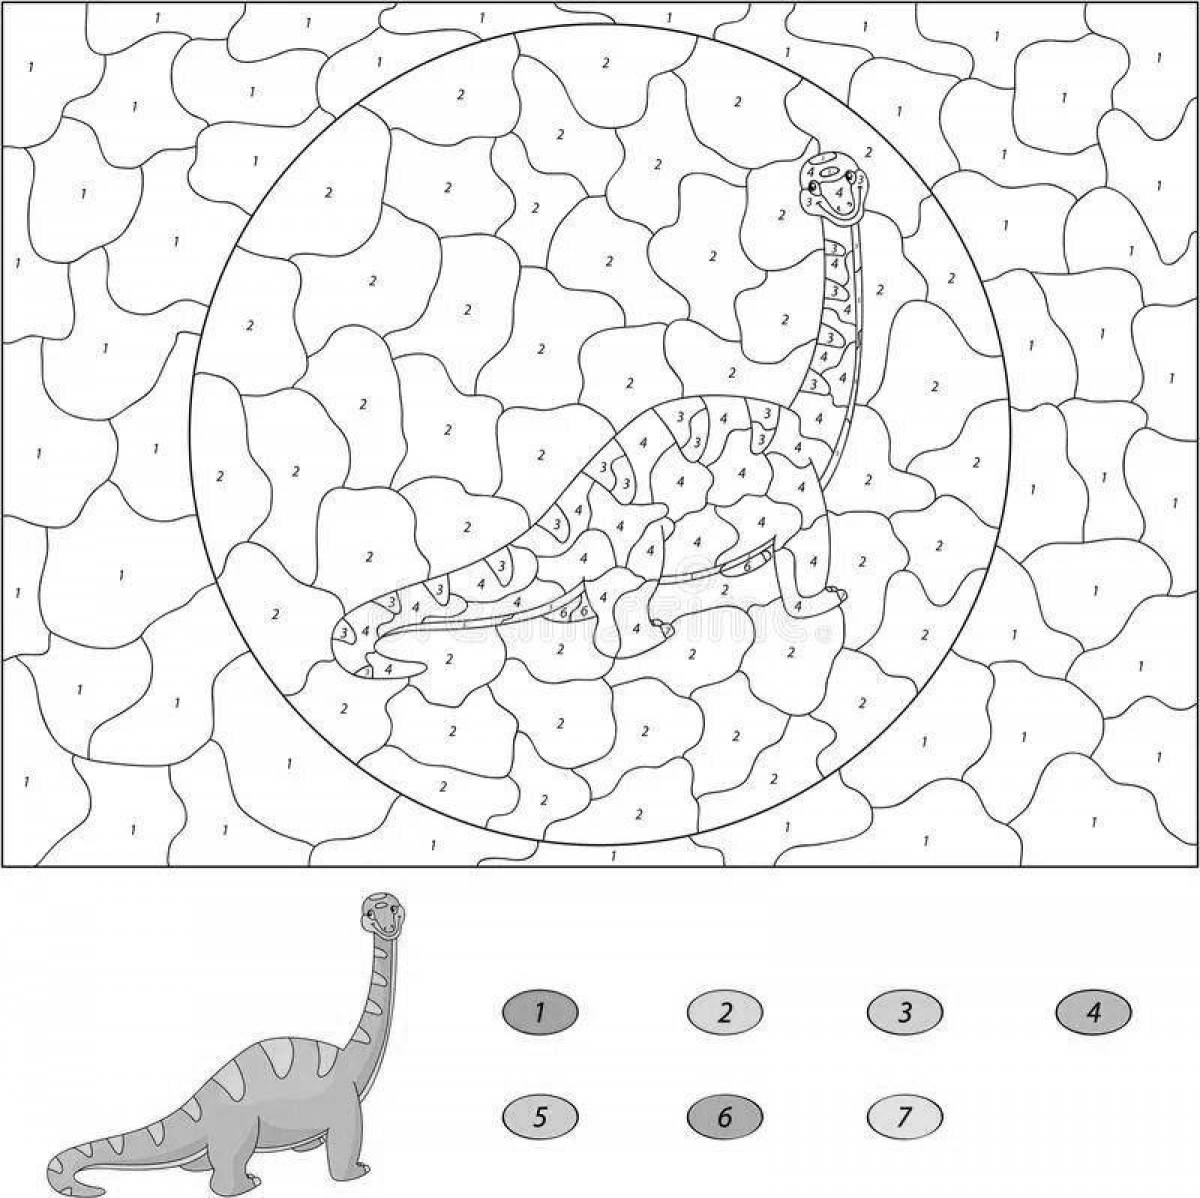 Dinosaur coloring by numbers